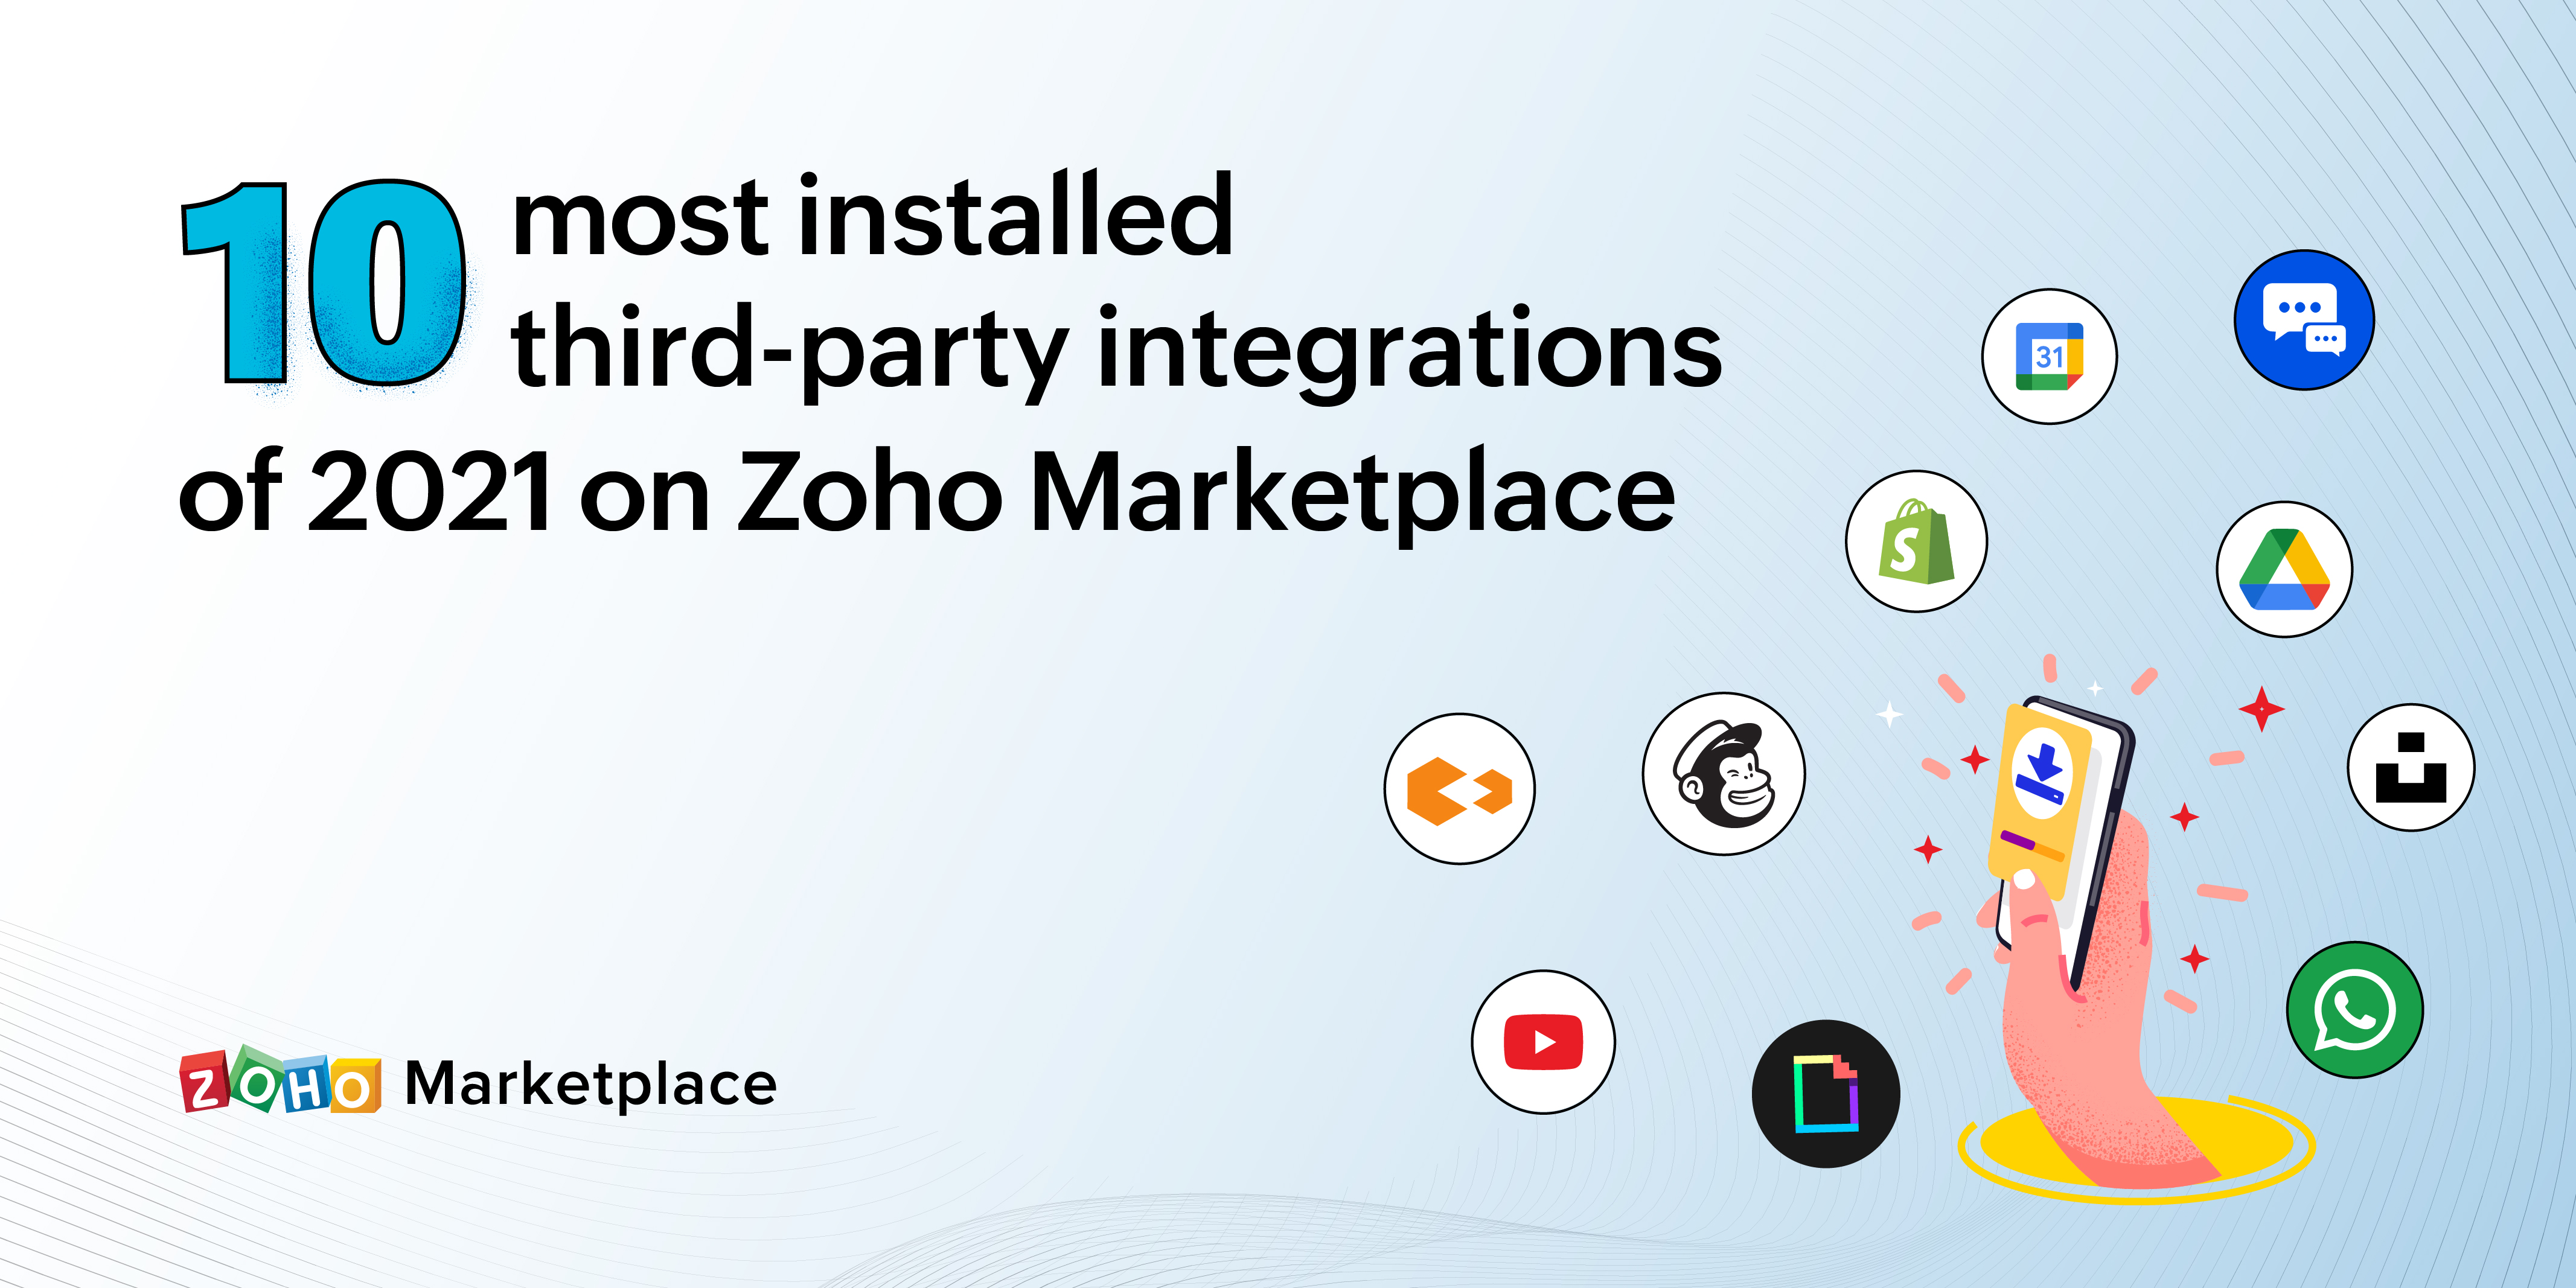 10 most installed third-party integrations of 2021 on Zoho Marketplace